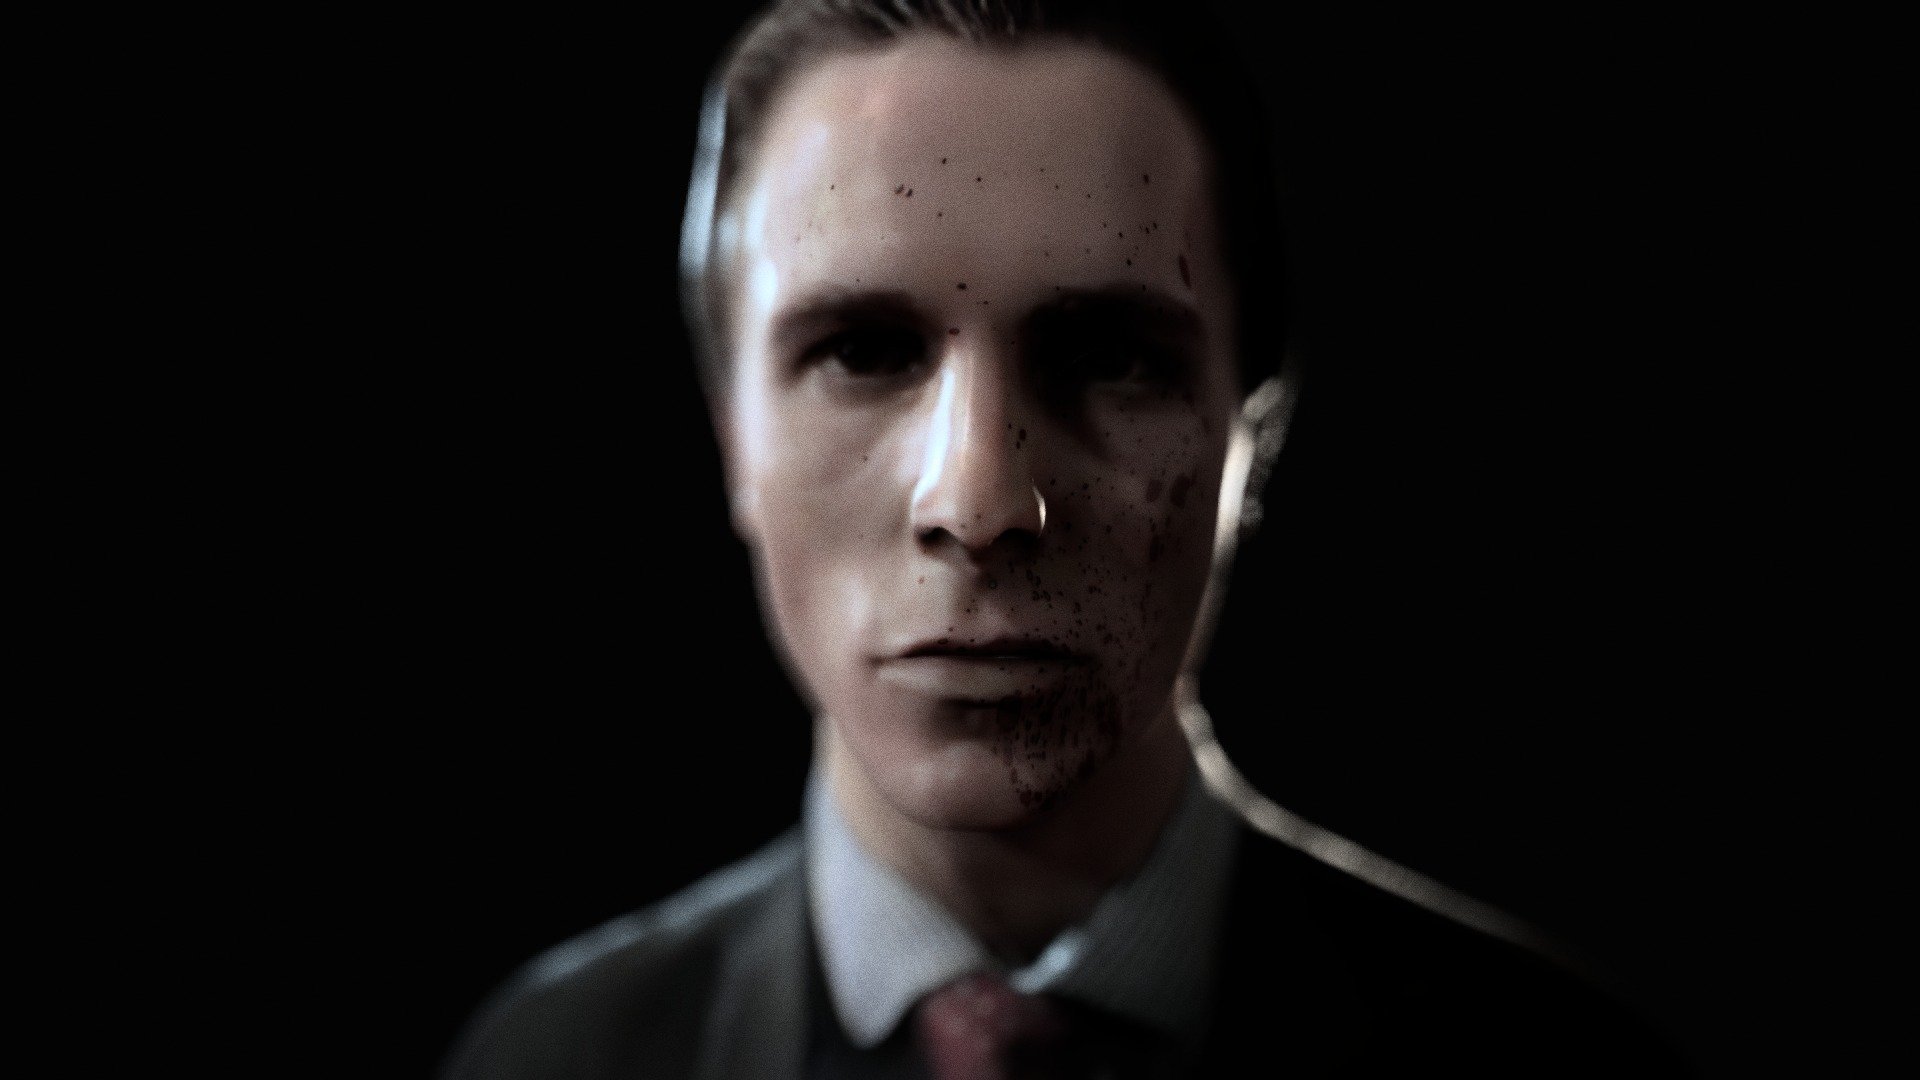 Christian Bale at the film American Psycho 3d model